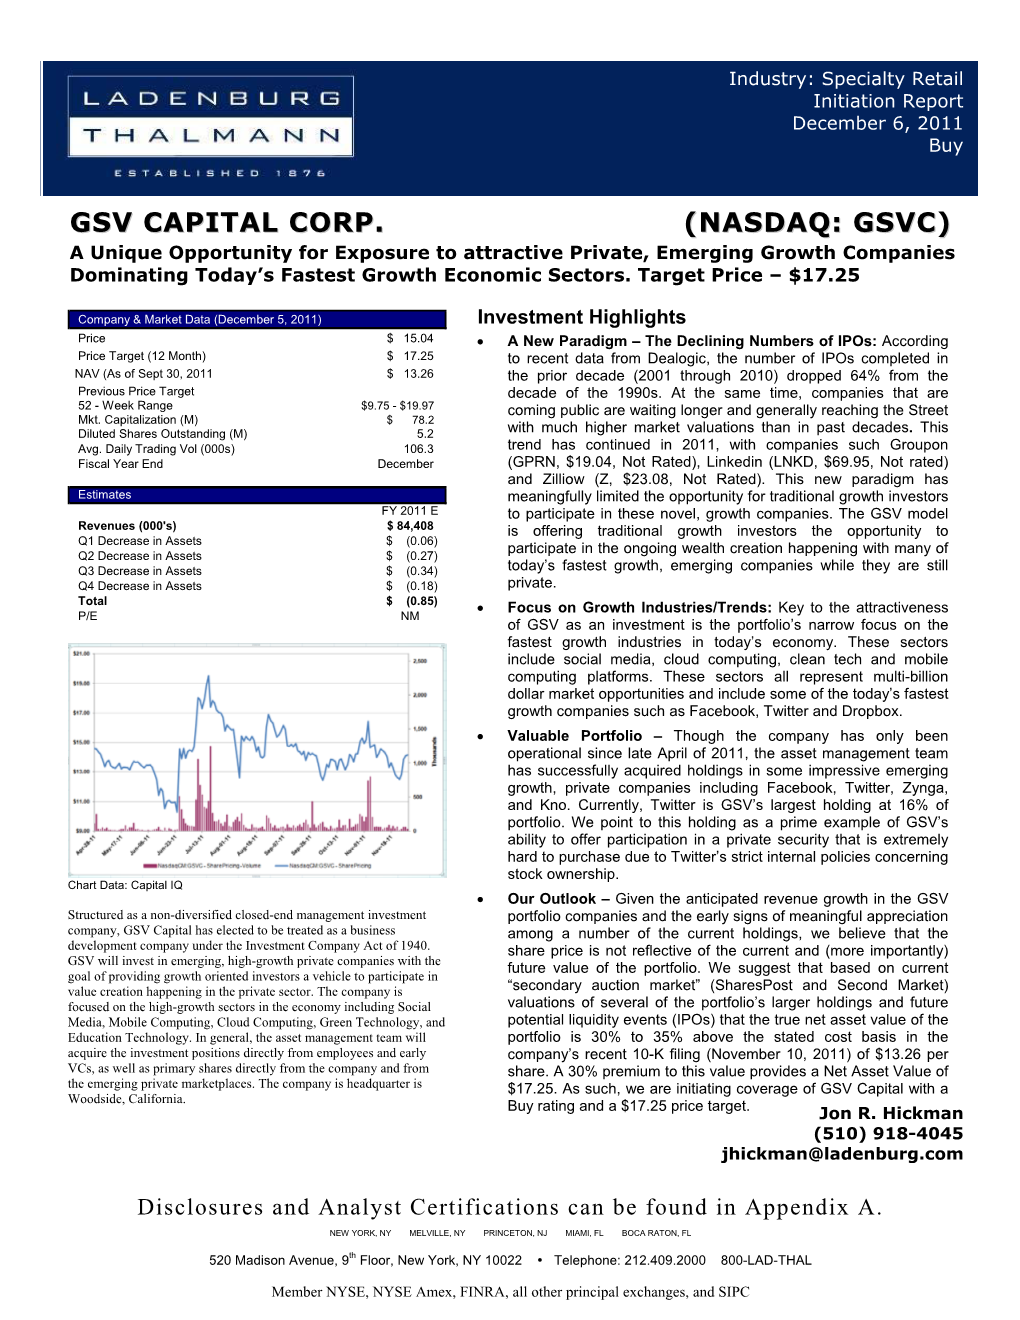 GSV CAPITAL CORP. (NASDAQ: GSVC) a Unique Opportunity for Exposure to Attractive Private, Emerging Growth Companies Dominating Today’S Fastest Growth Economic Sectors